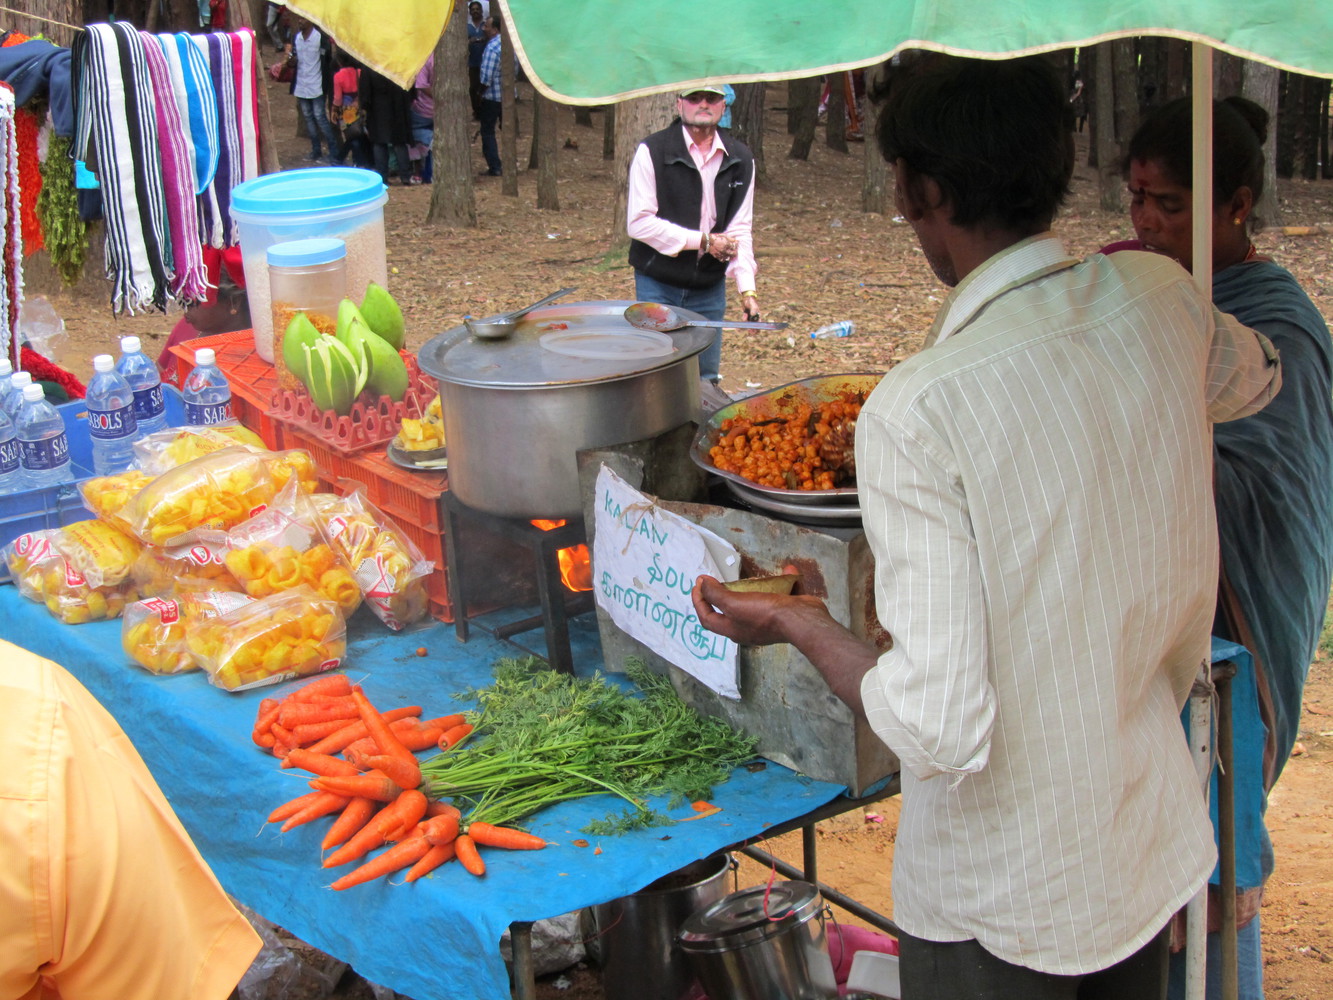 A vendor selling carrots, soup, mangoes, and other food on a food cart